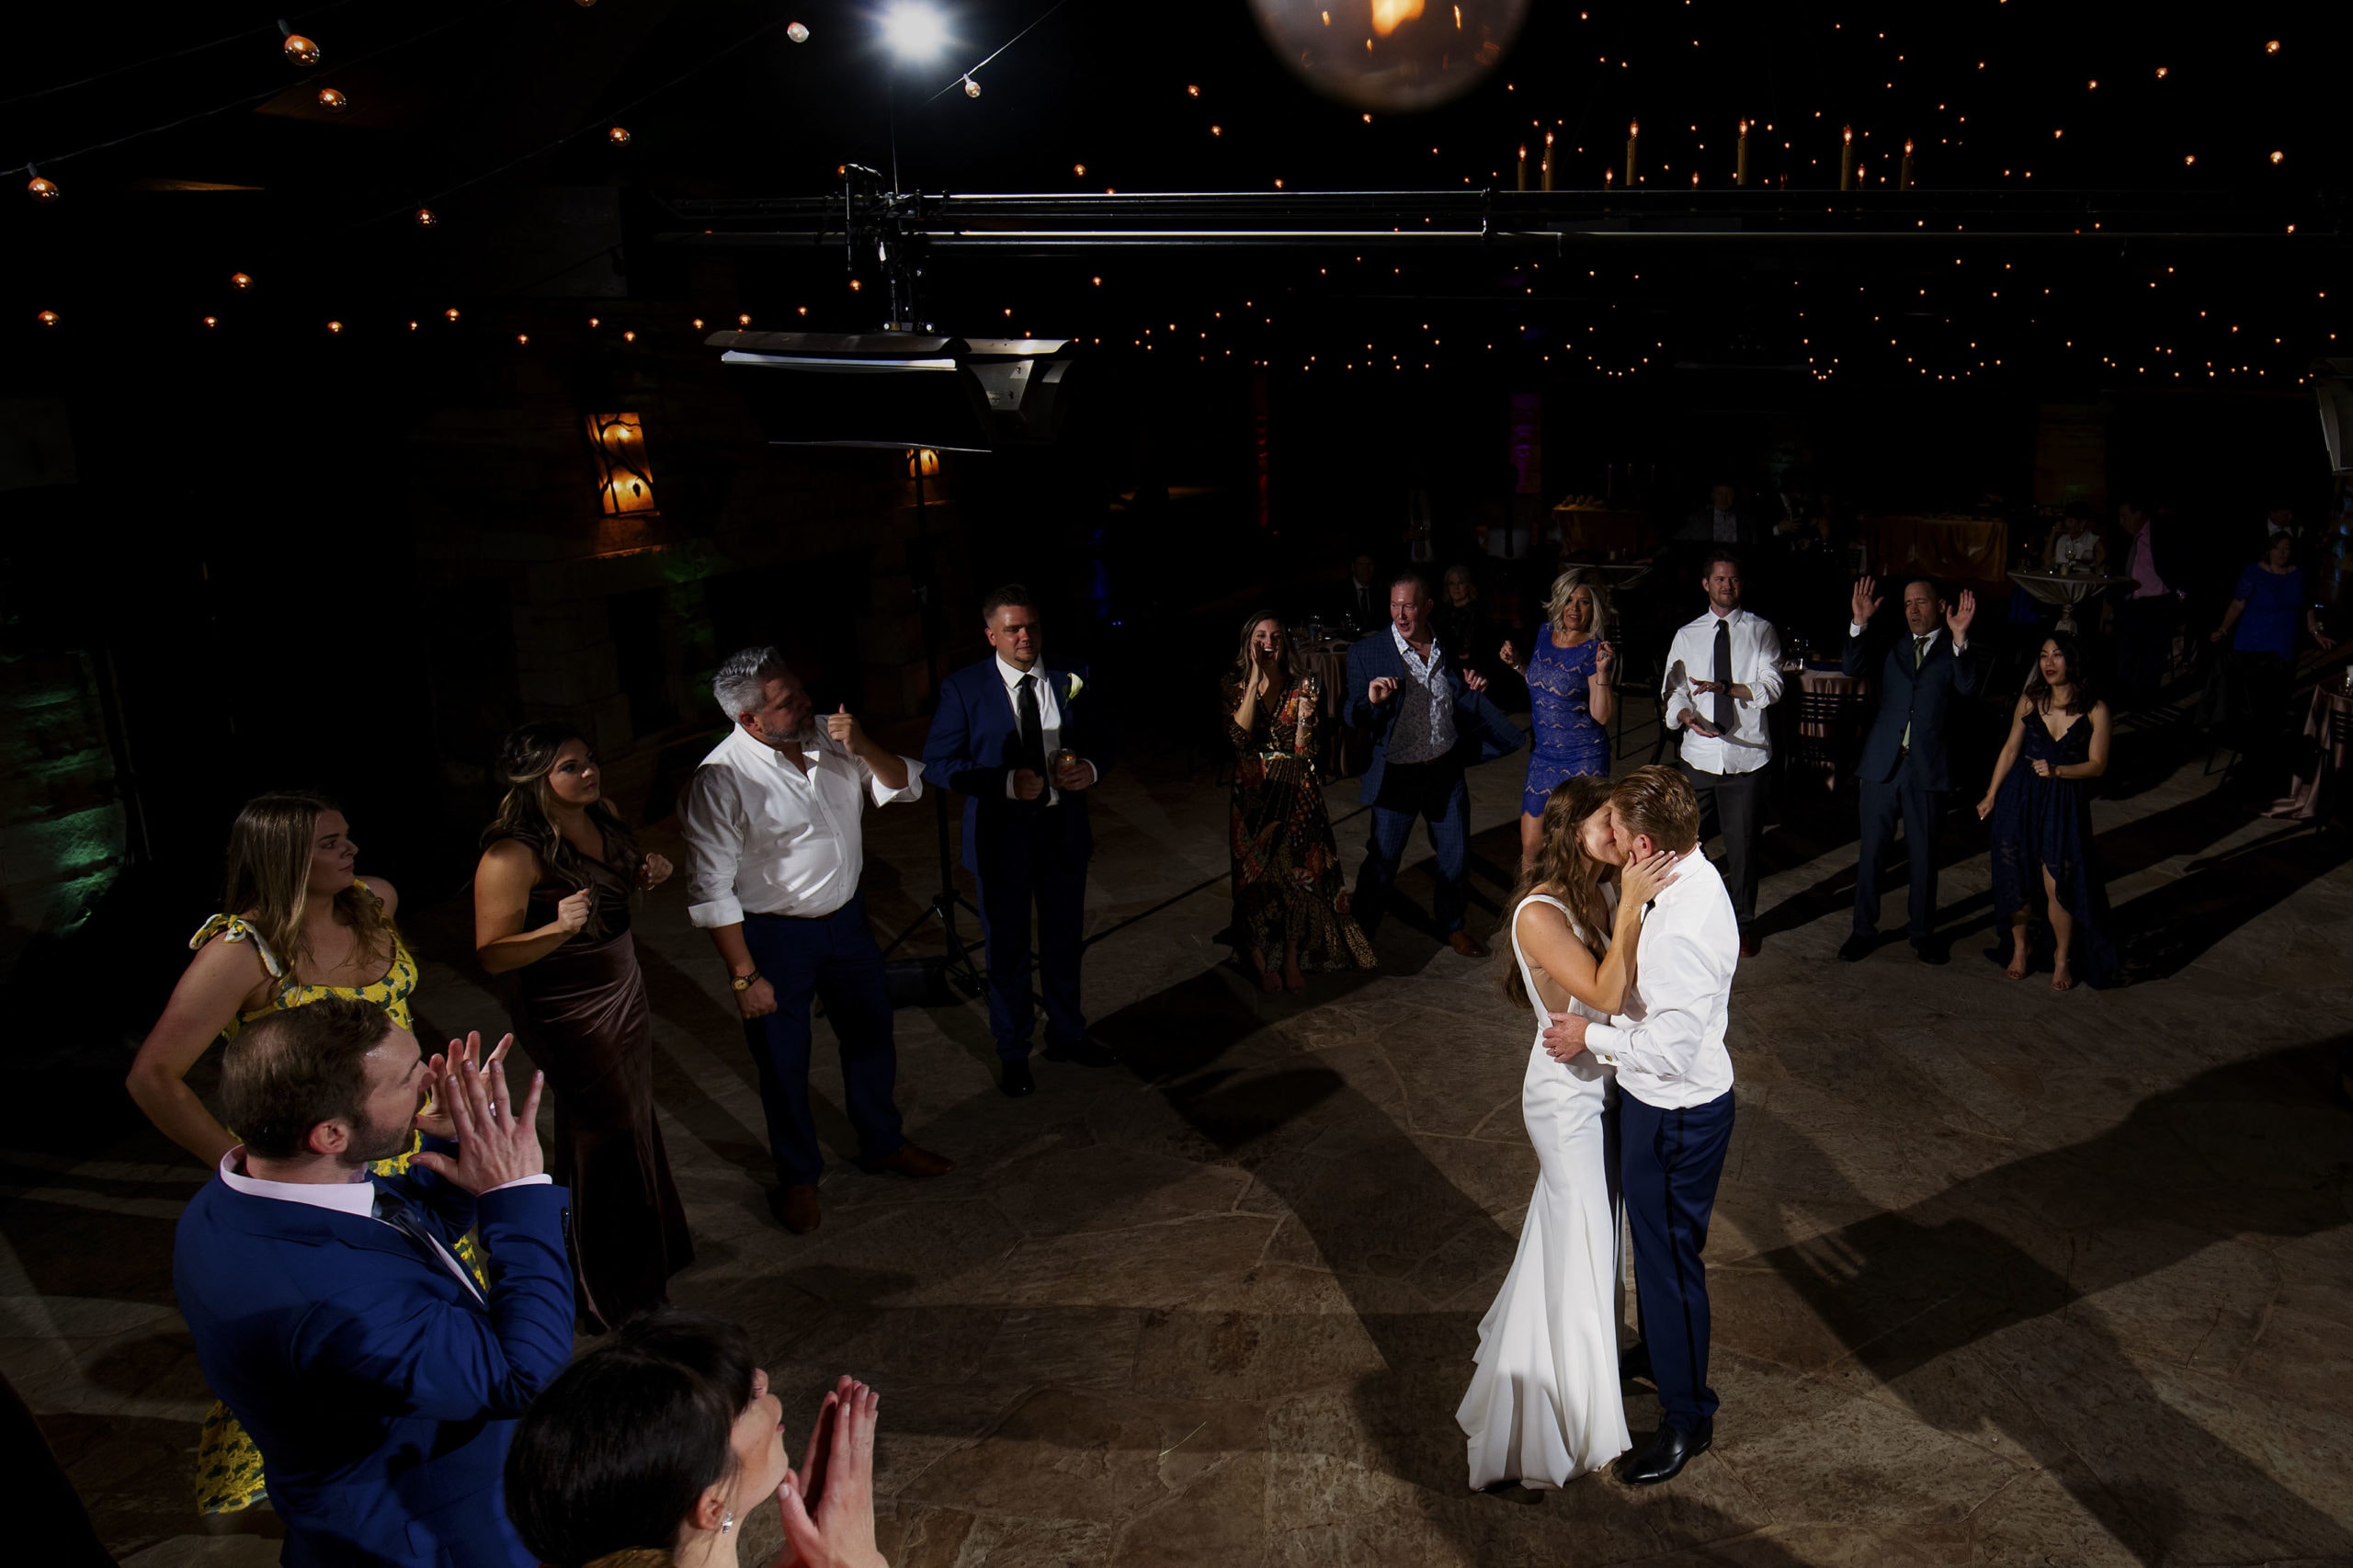 The couple share a kiss on the dance floor during their wedding at Sanctuary Golf Course